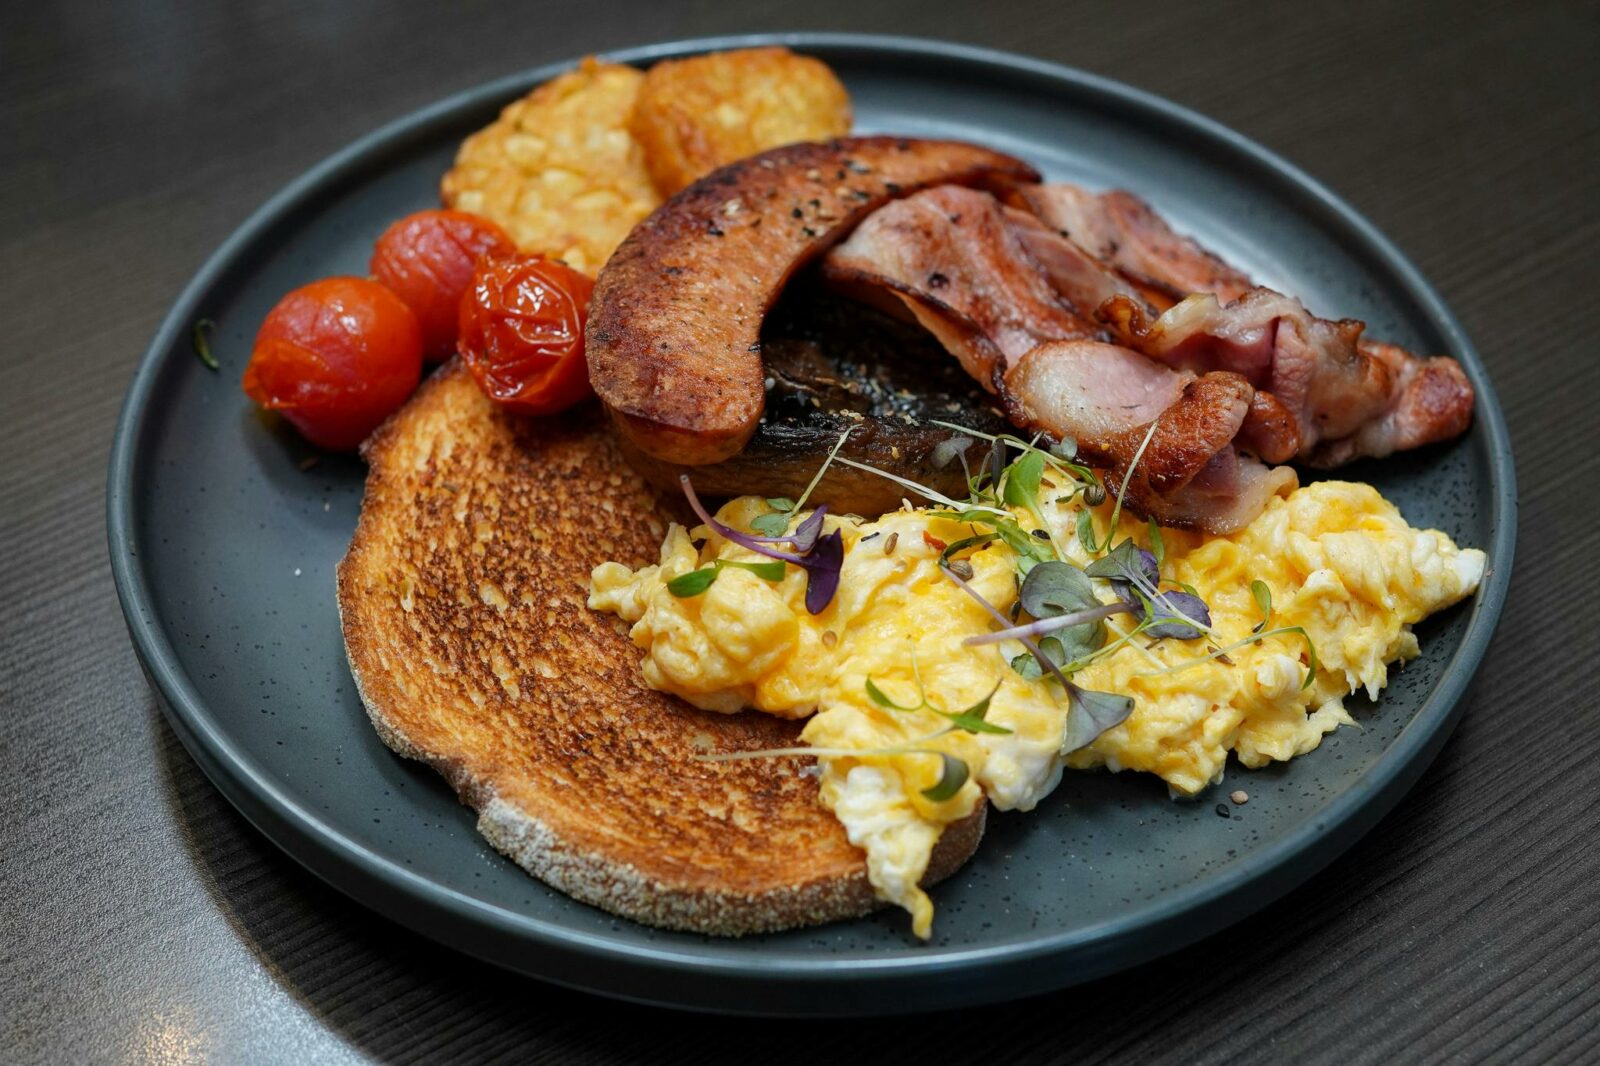 A breakfast order with bacon, sausage, scrambled eggs, hash browns, tomatoes and toast